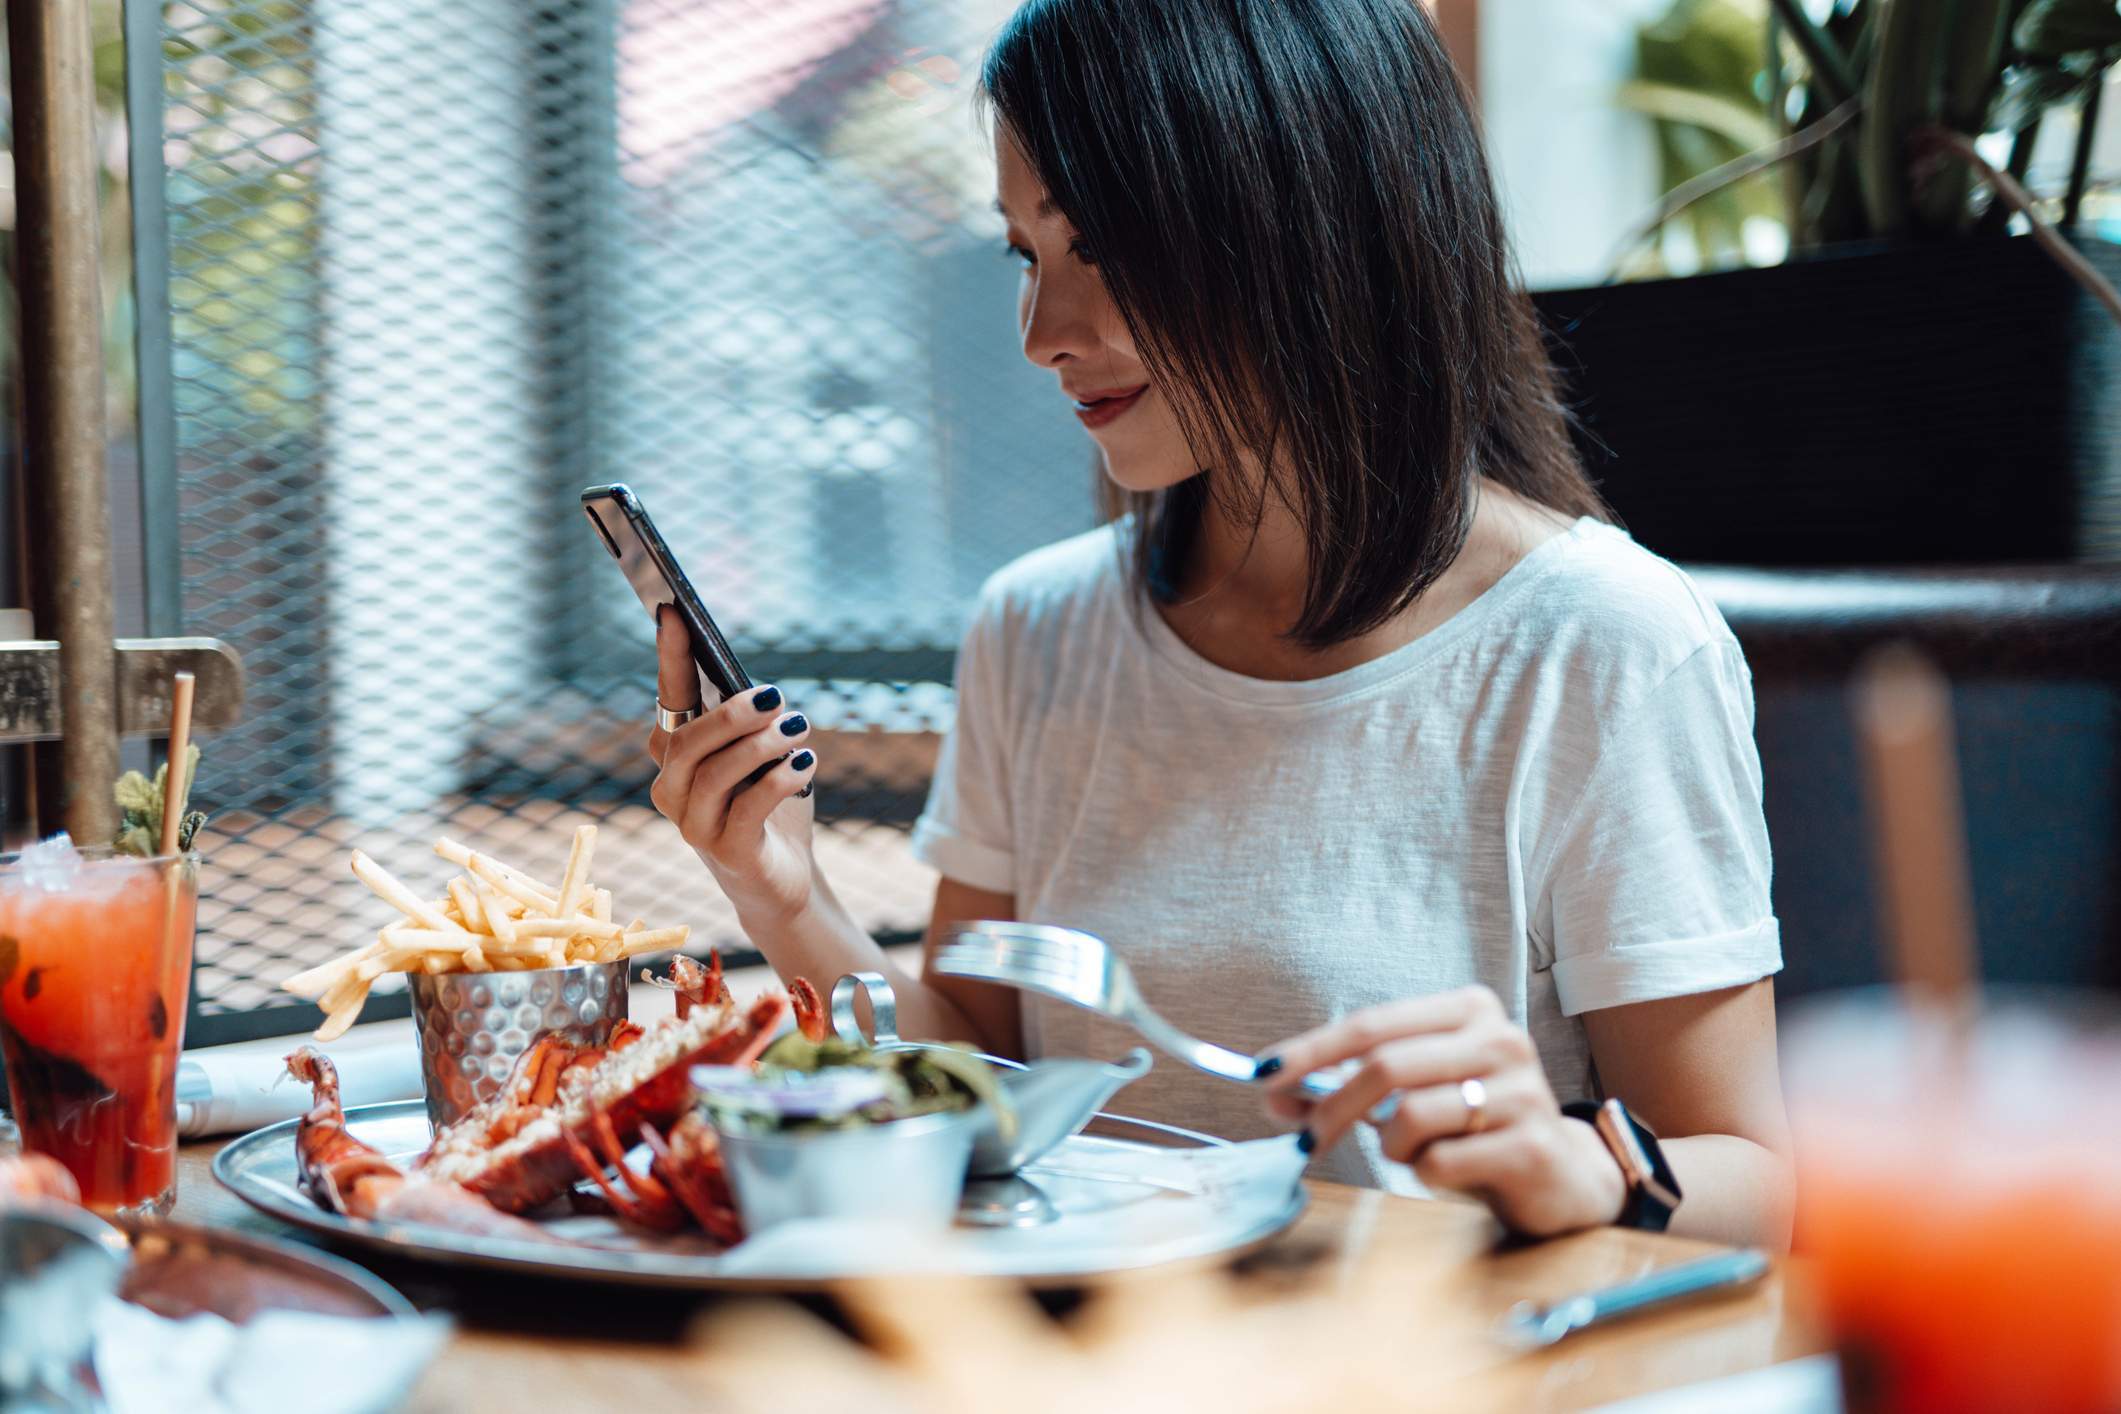 A restaurant customer is enjoying her meal while looking at her mobile phone